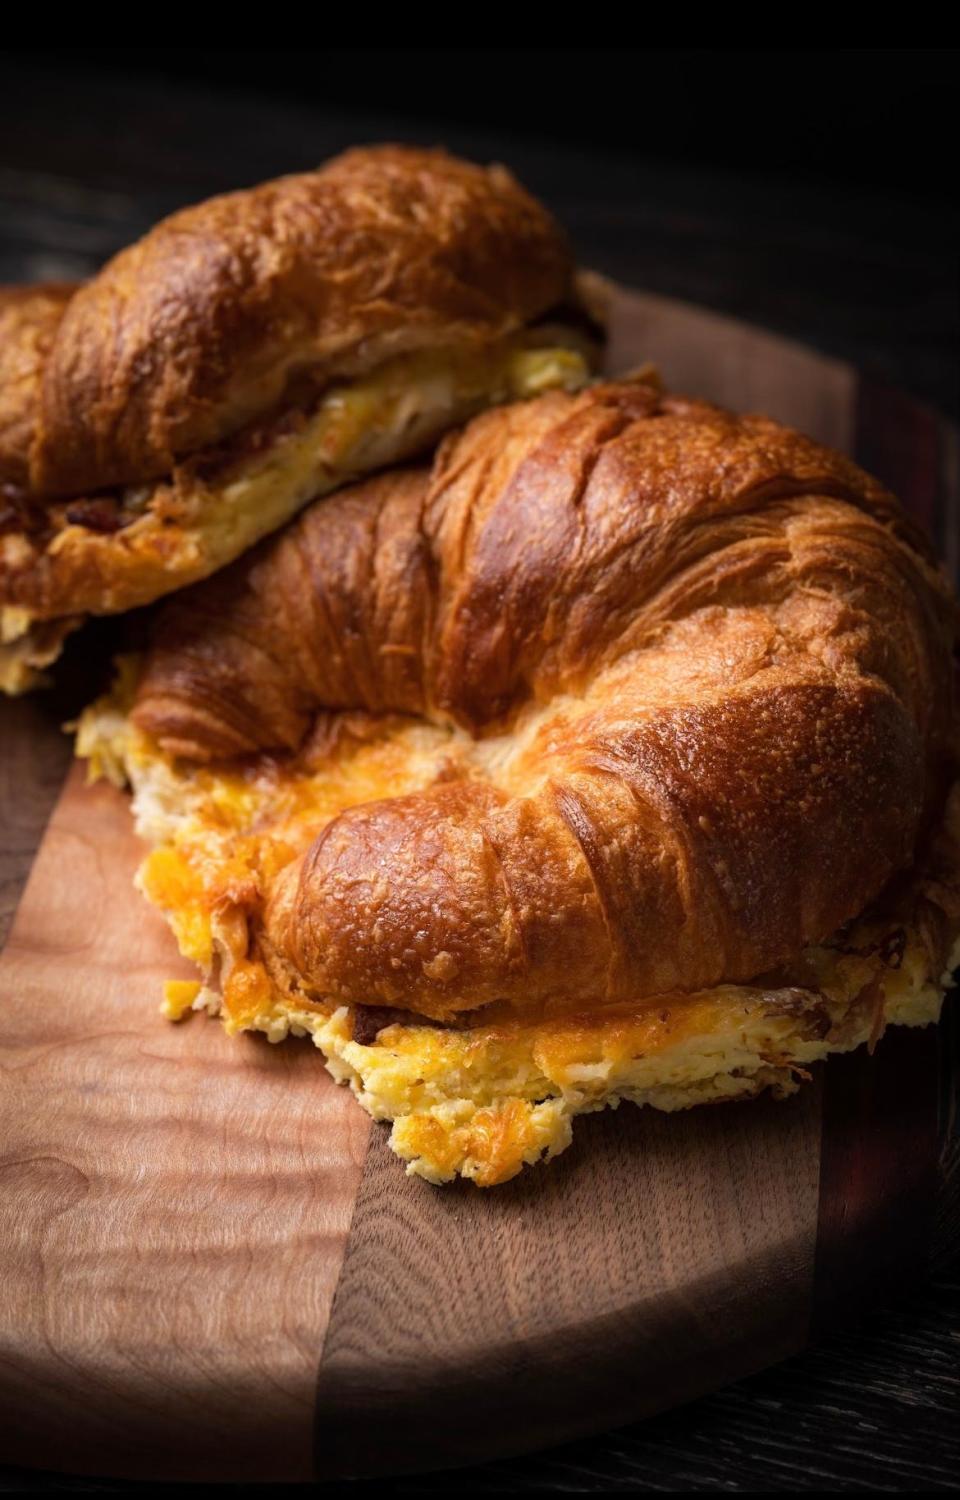 The Savory Breakfast Sandwich made with bacon, egg, and cheese sandwich served on a croissant is among the new menu items Little Cakes with Big Attitude is set offer at both their Alexandria and Pineville locations once the Pineville shop is up and running.